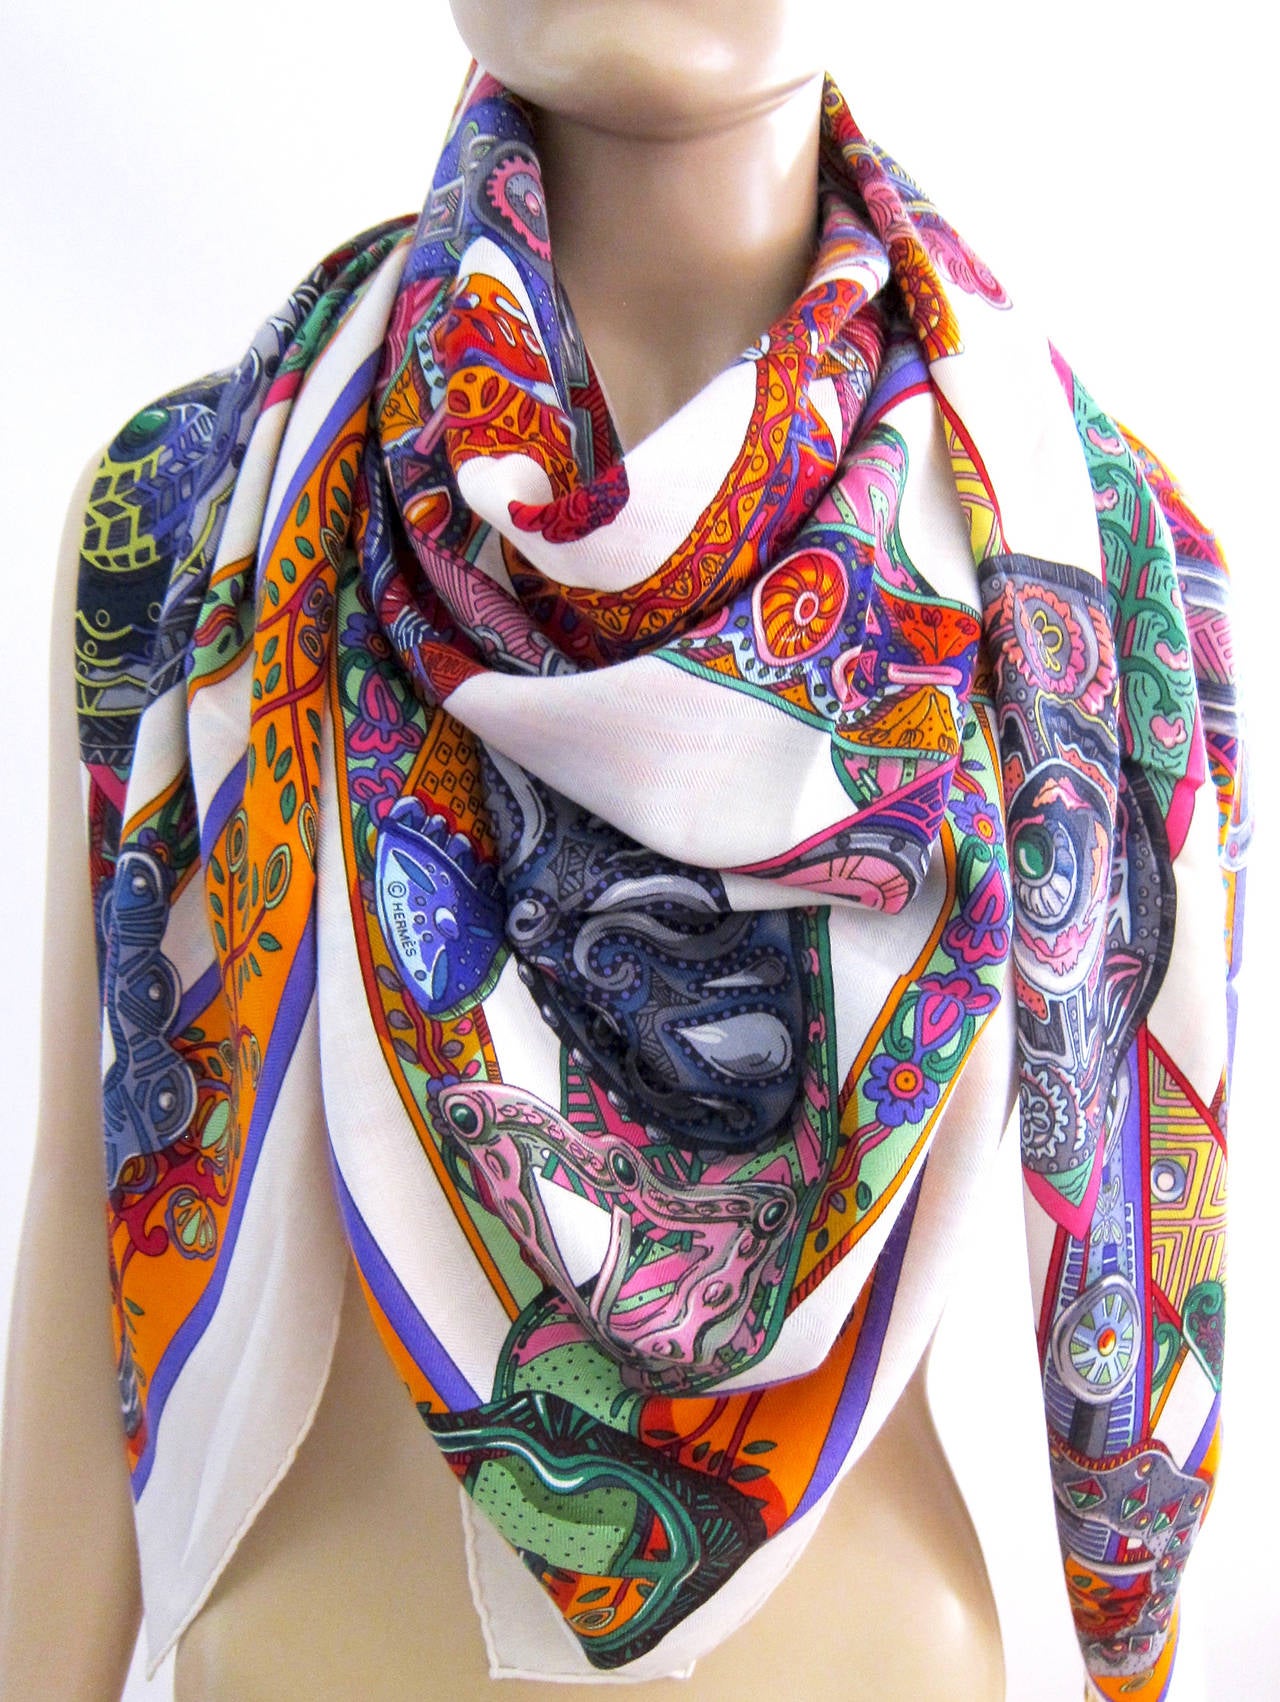 Hermes Le Songe de la Licorne Blanc Iris Rose Cashmere Silk Shawl
Blanc / Iris / Rose Colorway
Masterpiece by Annie Faivre featuring all of Hermes' best colors for spring.
One of our most successful shawls of all time
Sold out now!
Brand New,